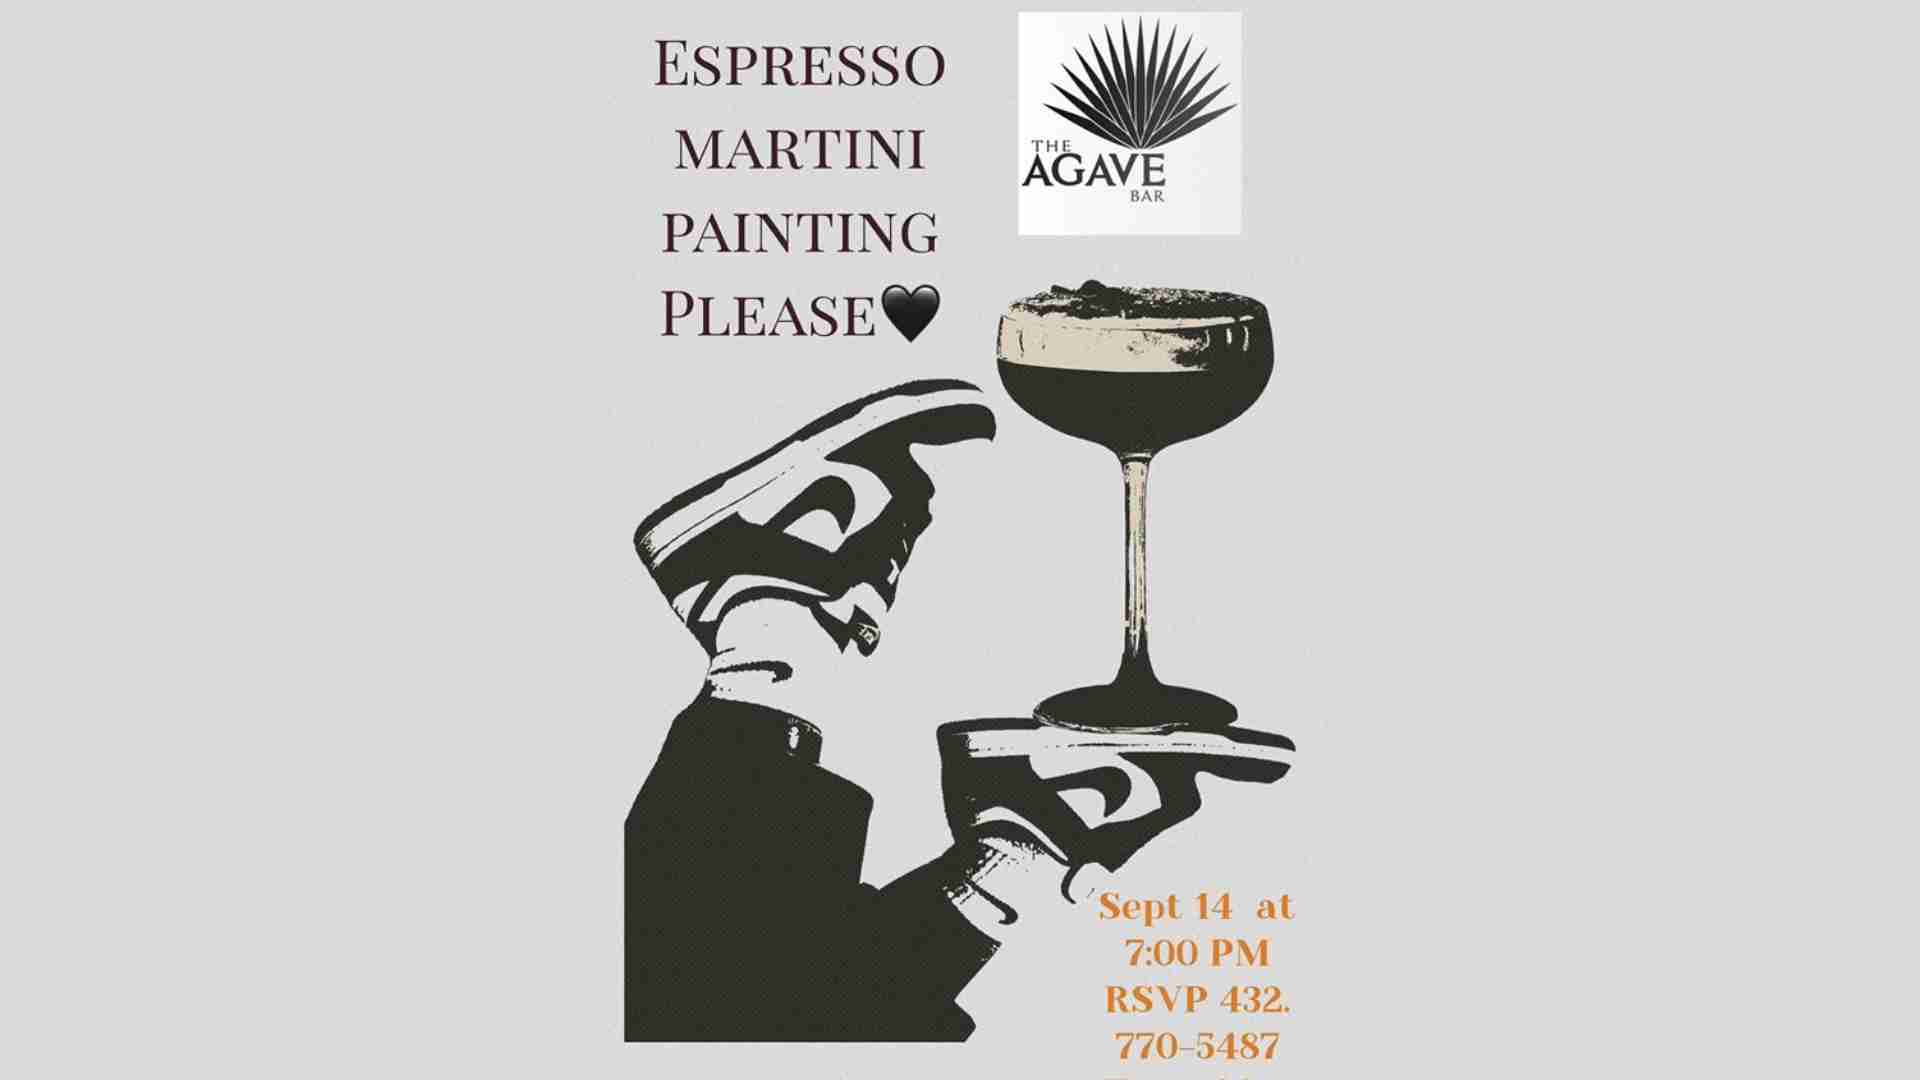 Espresso Martini Painting at The Agave Bar on Sept. 14, 2023 in Odessa, TX